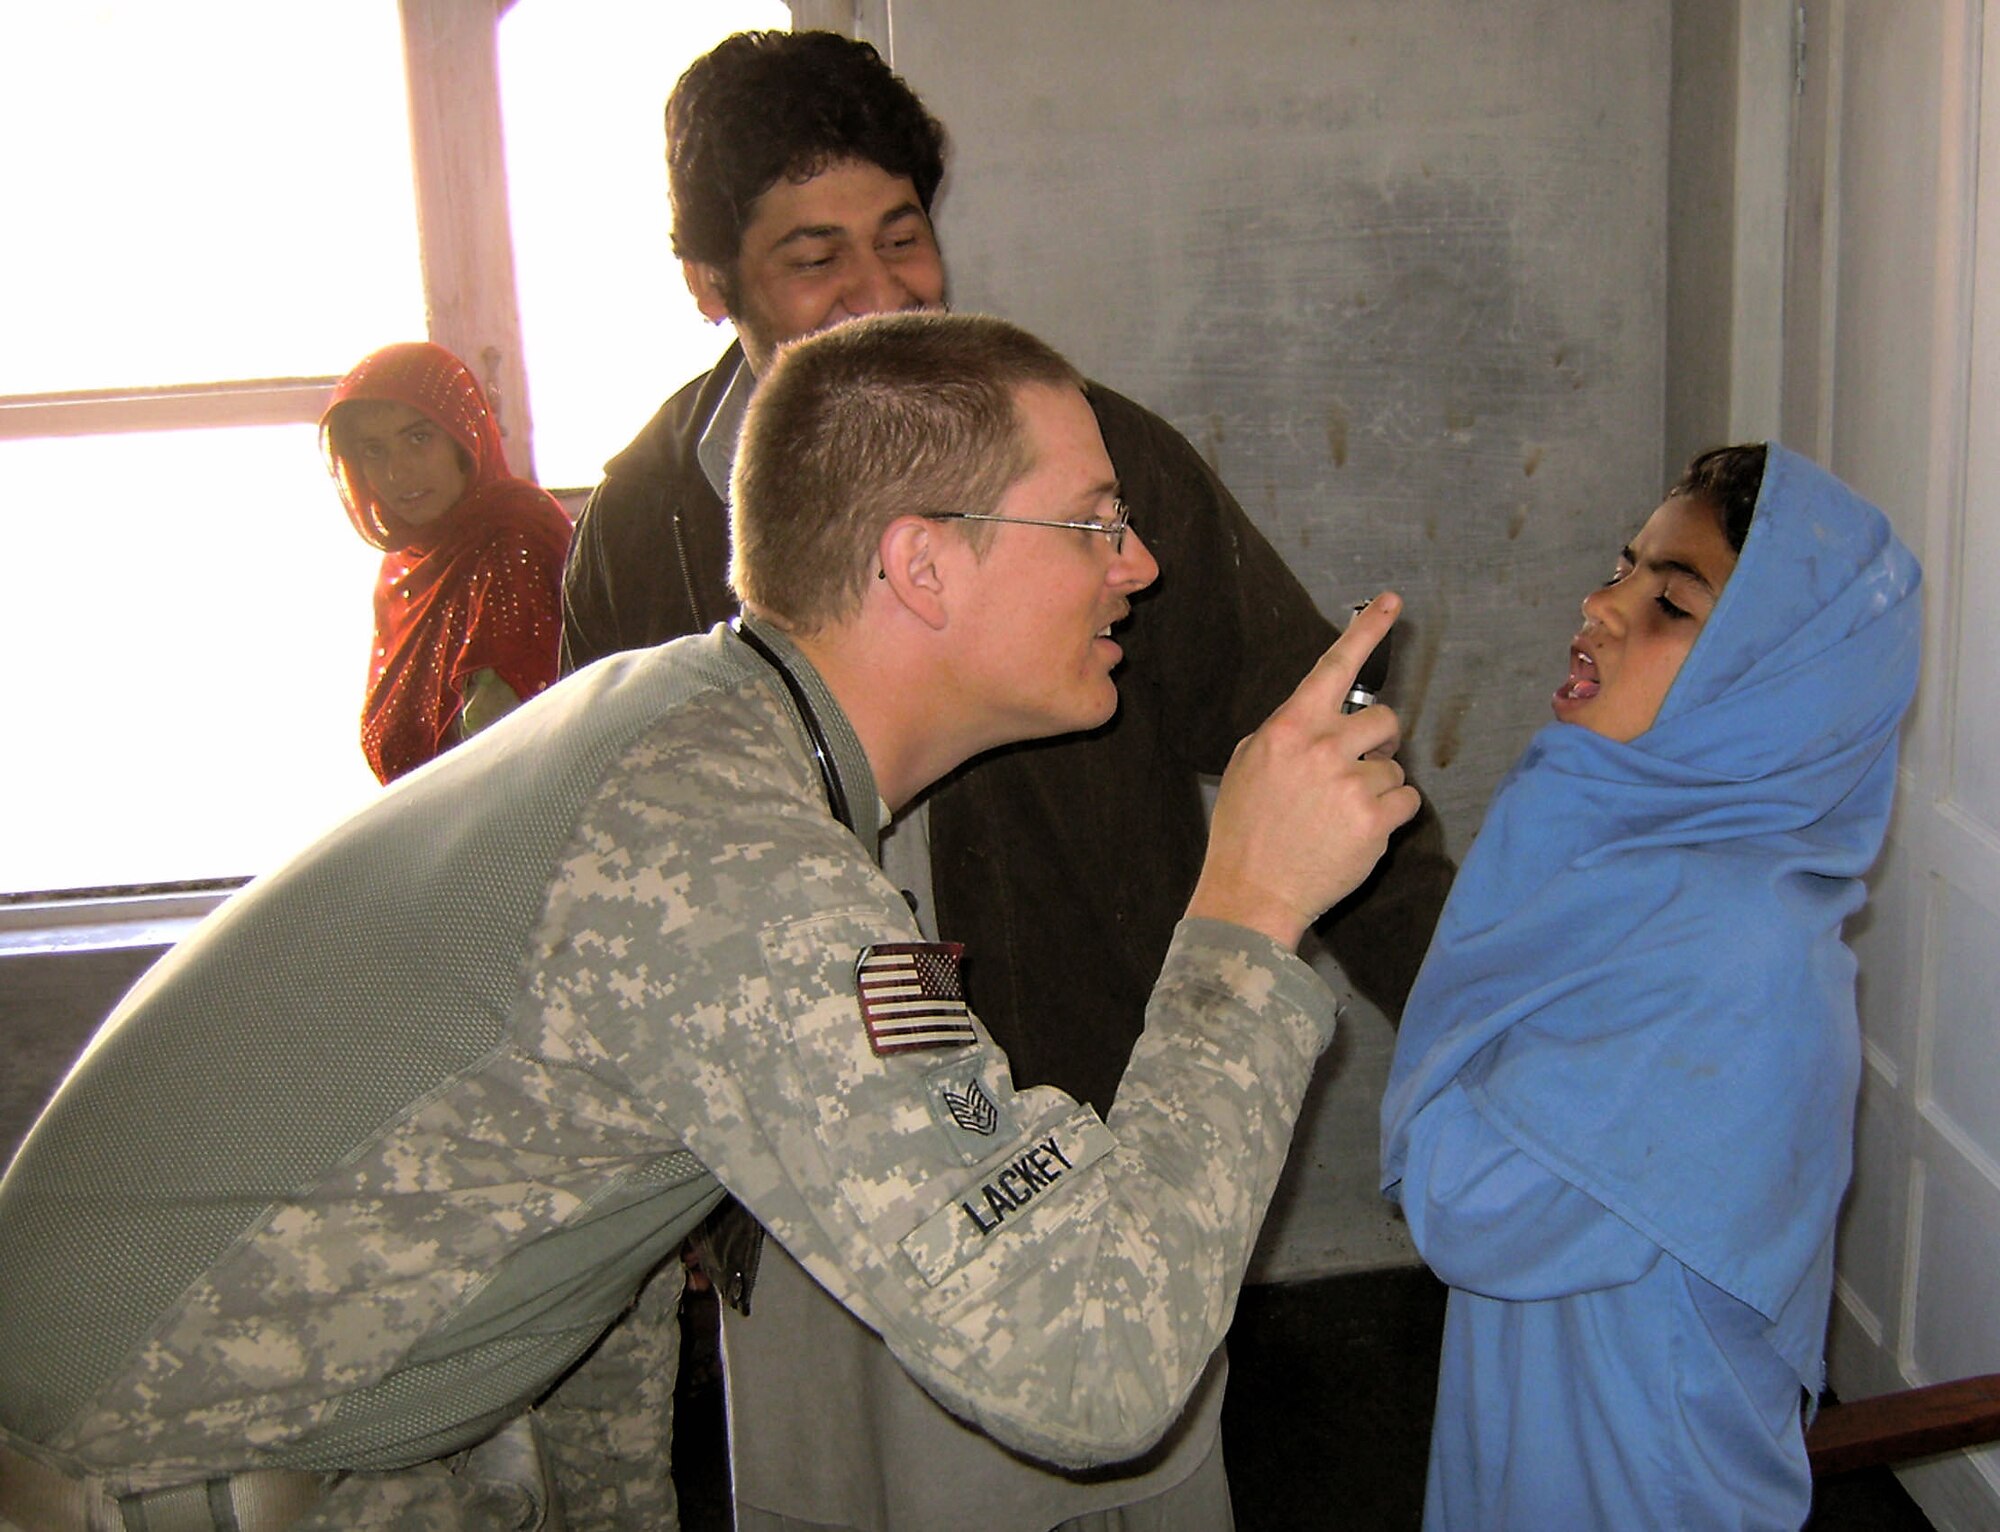 Technical Sgt. Joshua Lackey examines an Afghan girl from the Hope of Mother School, Feb. 24 in the Surkh Rod District of Afghanistan. American medics treated more than 120 people during the medical assistance operation at the school and clinic. Sergeant Lackey is a medic with the provincial reconstruction team in Afghanistan's Nangarhar province. (U.S. Air Force photo/Capt. Dustin Hart) 
